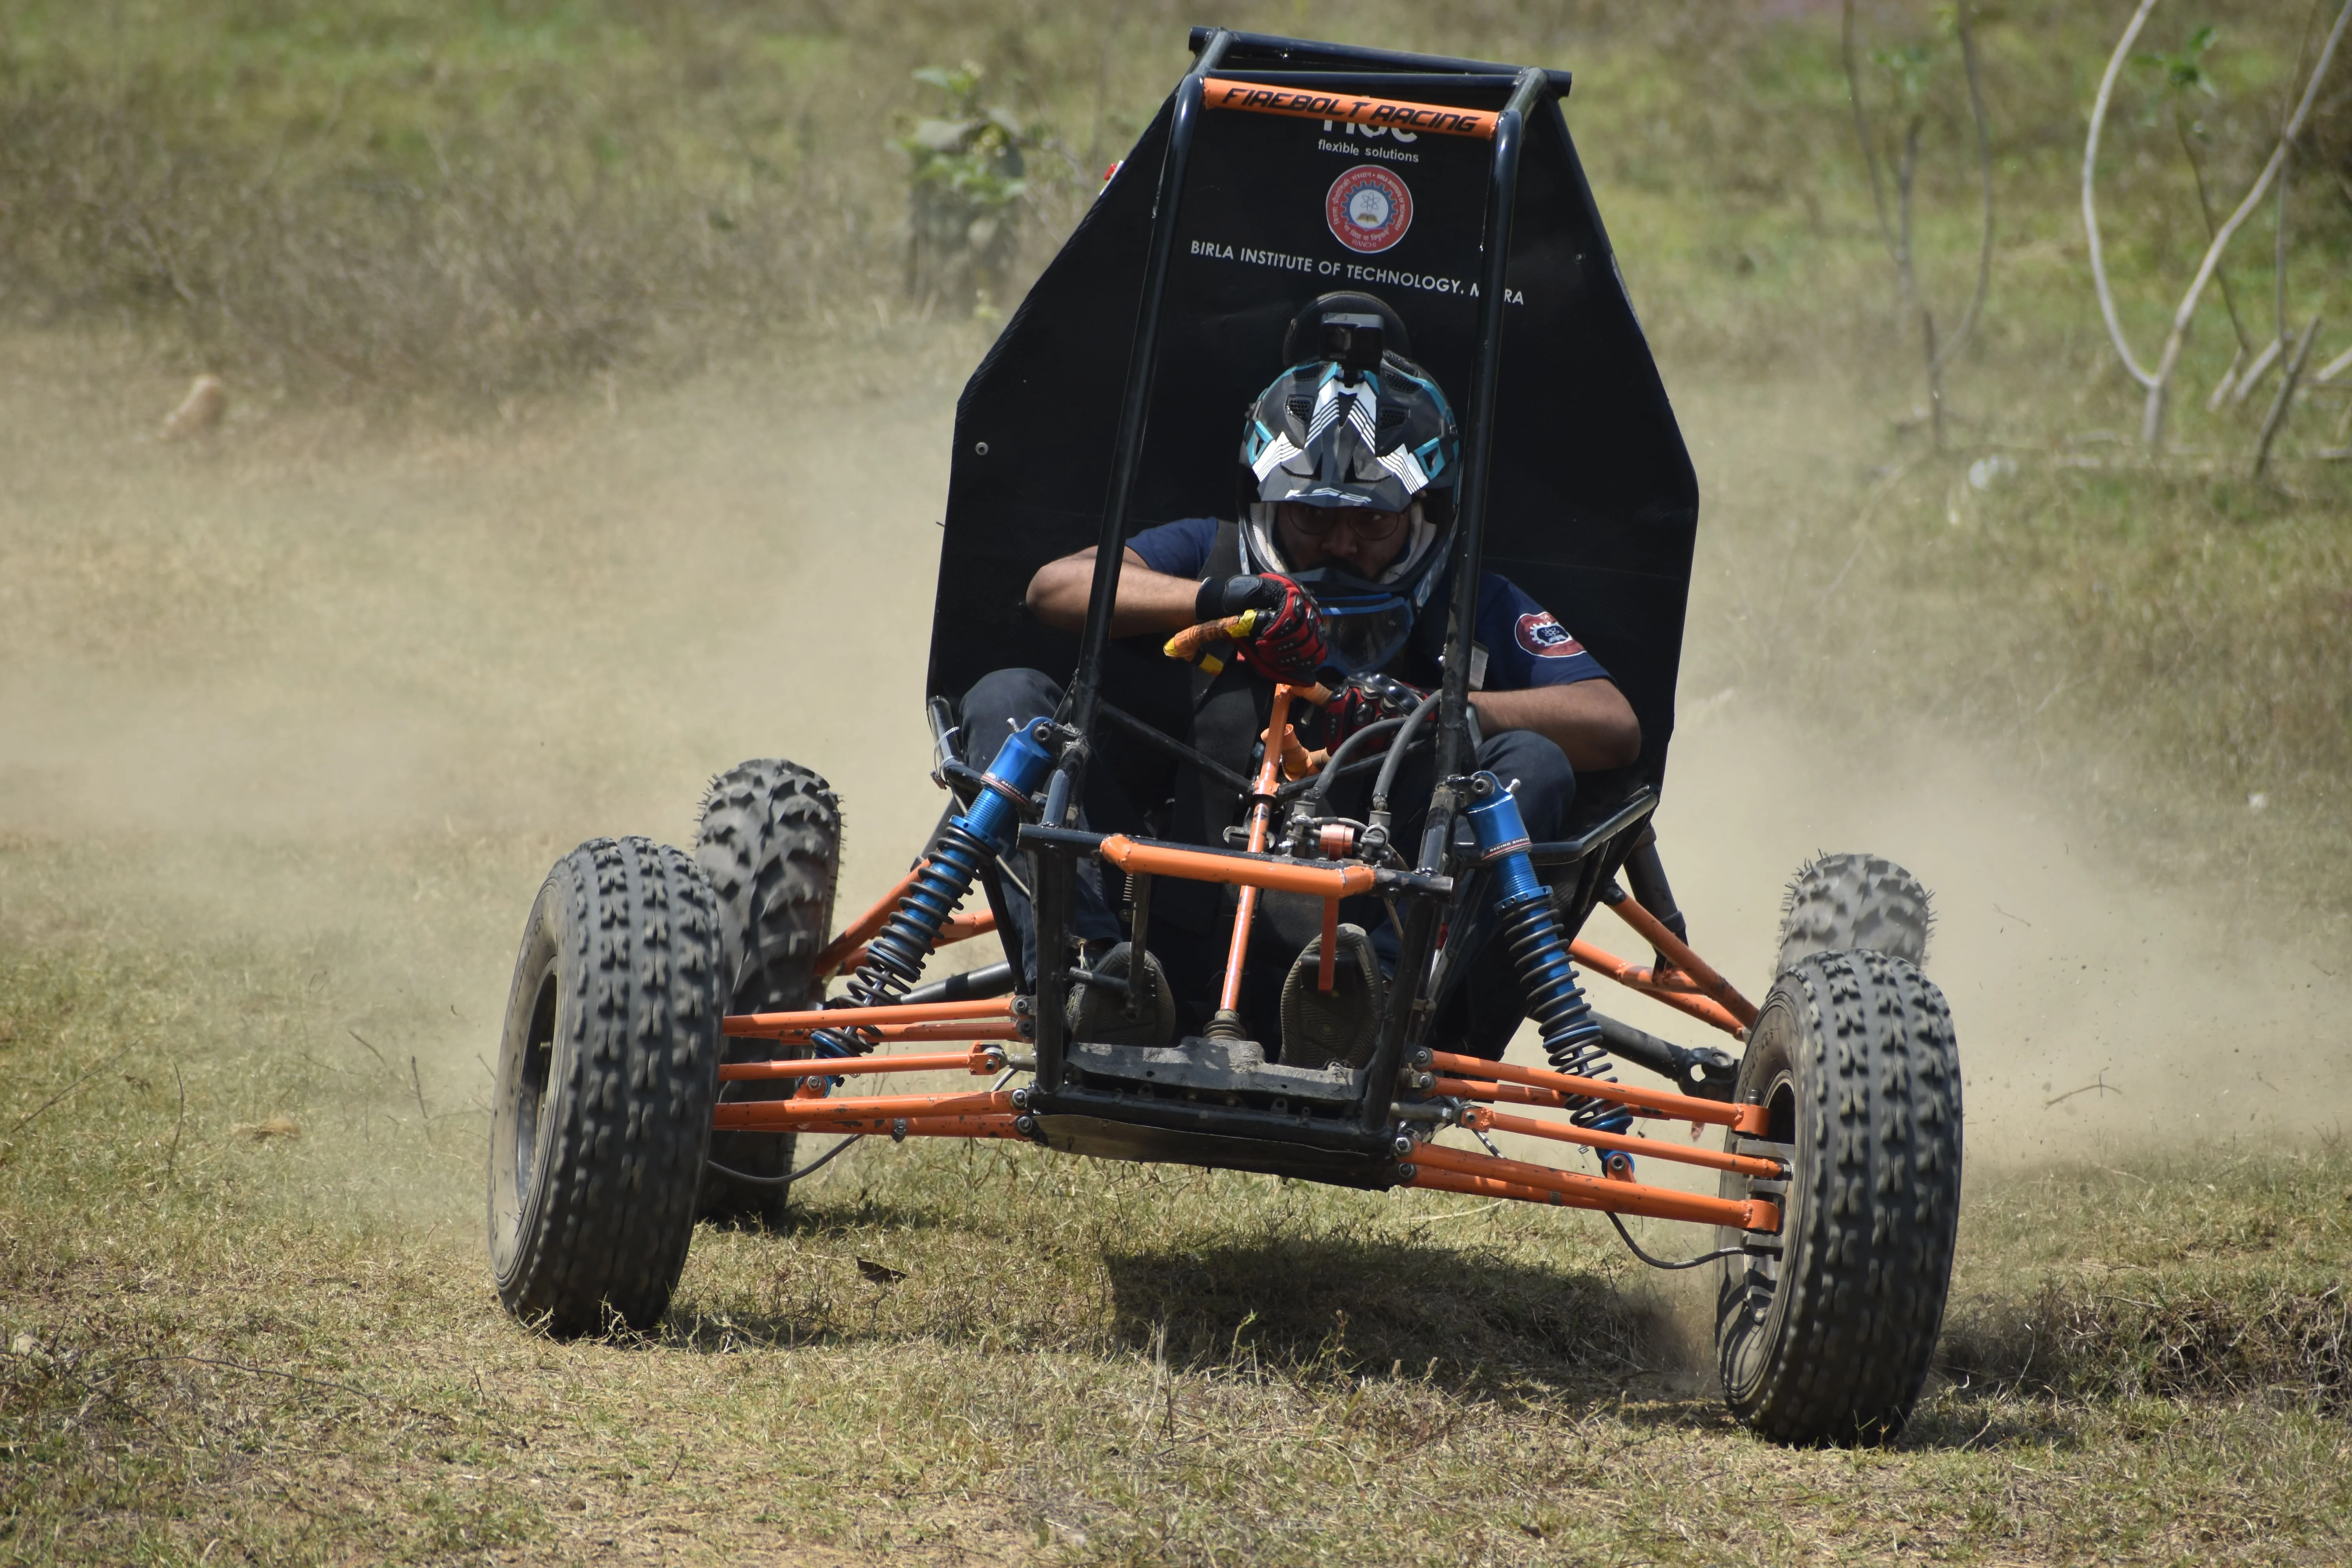 Testing and driving of the all-terrain vehicle by BIT Mesra Club